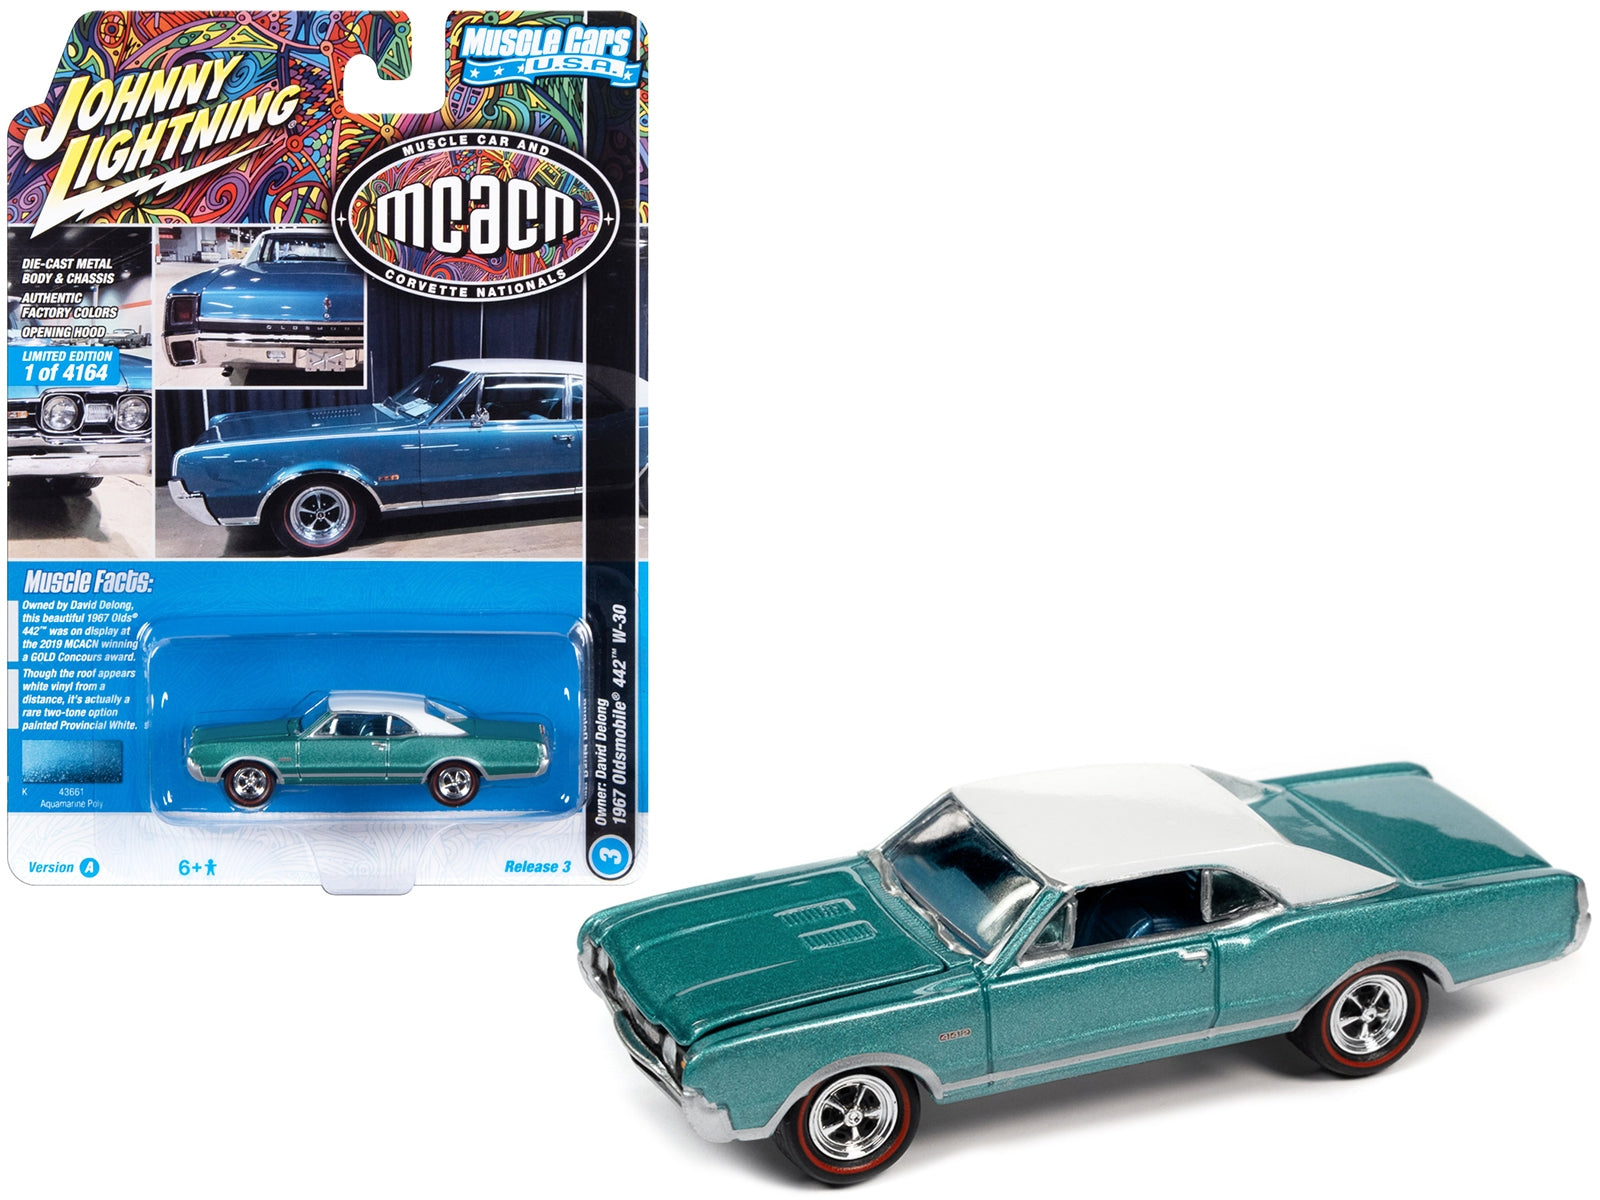 1967 Oldsmobile 442 W-30 Aquamarine Metallic with White Top "MCACN (Muscle Car and Corvette Nationals)" Limited Edition to 4164 pieces Worldwide "Muscle Cars USA" Series 1/64 Diecast Model Car by Johnny Lightning Johnny Lightning